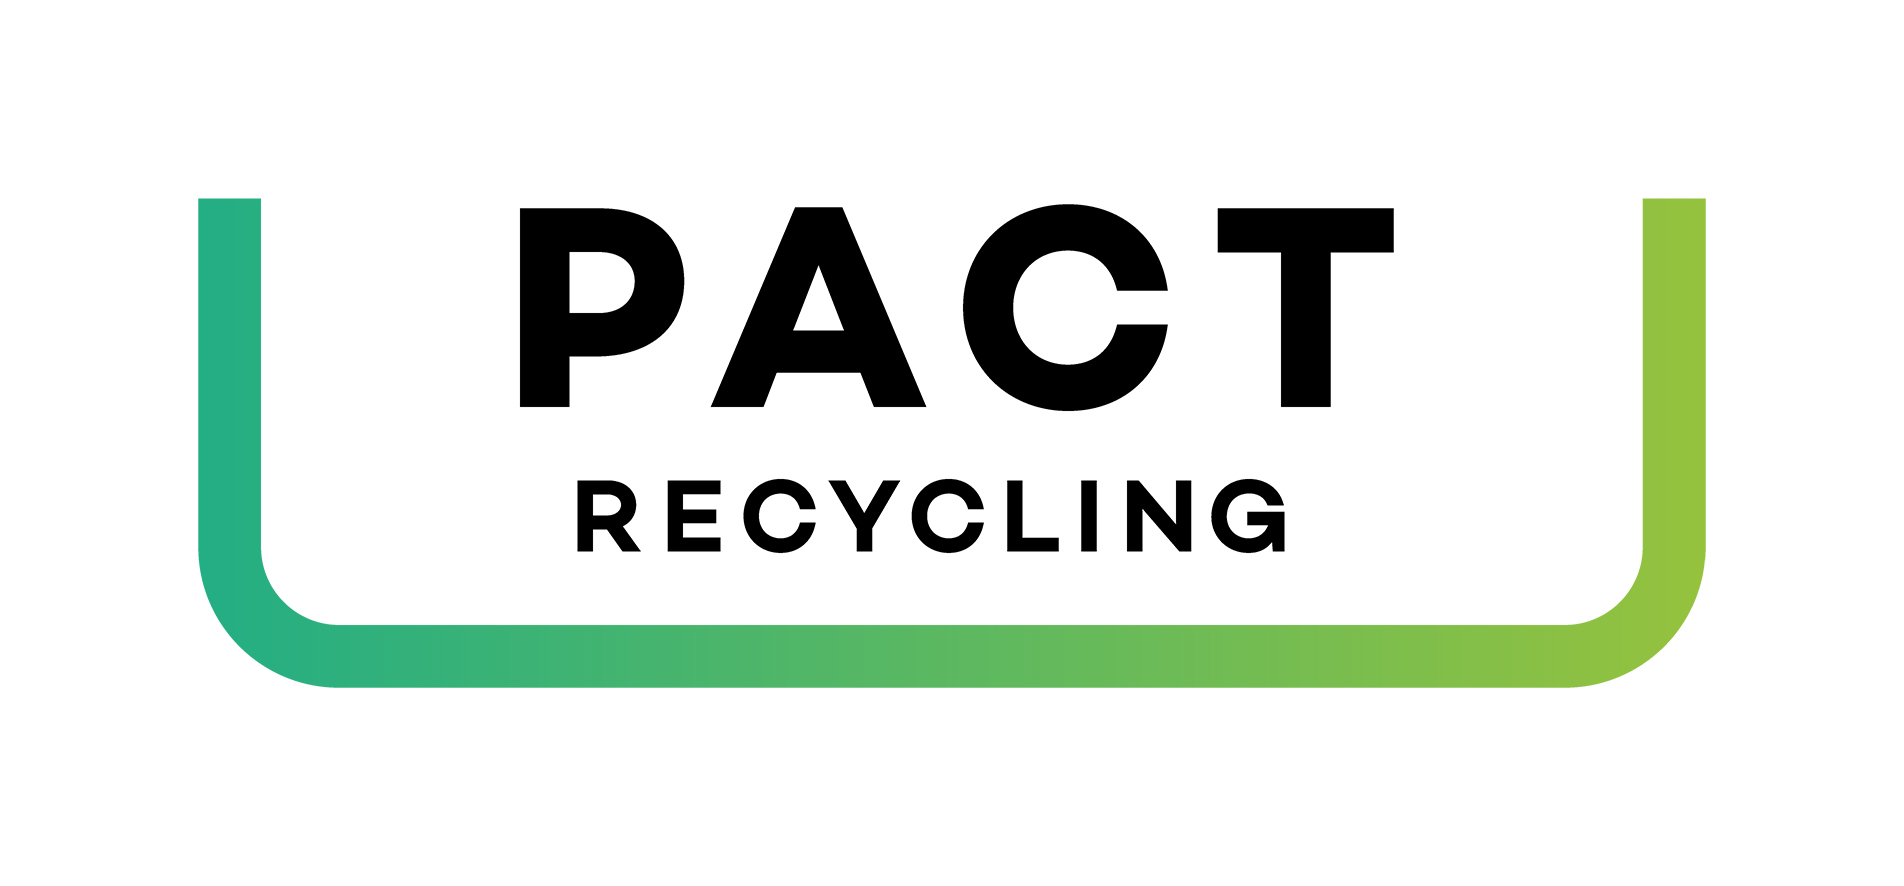 Pact Recycling